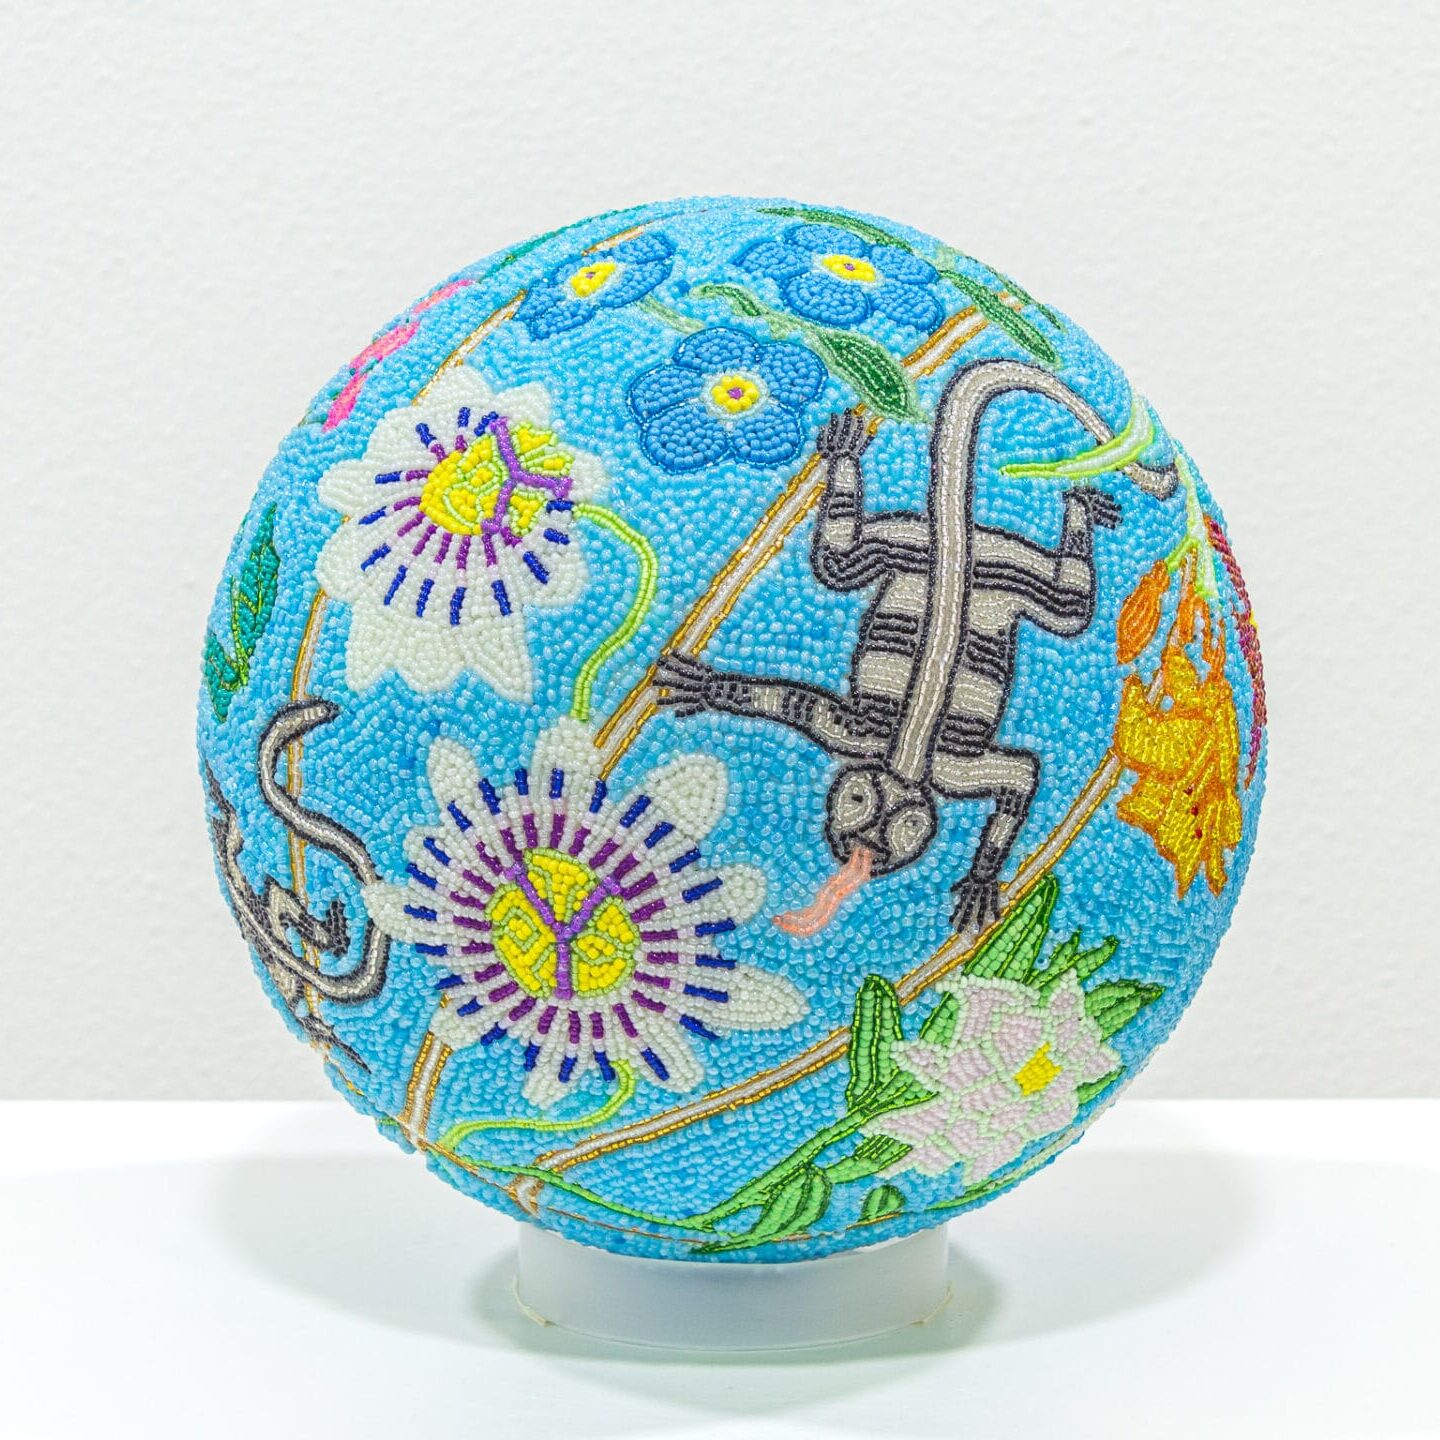 a glass bead-coated spherical sculpture made from a basketball depicting a lizard and numerous kinds of flowers on a blue background